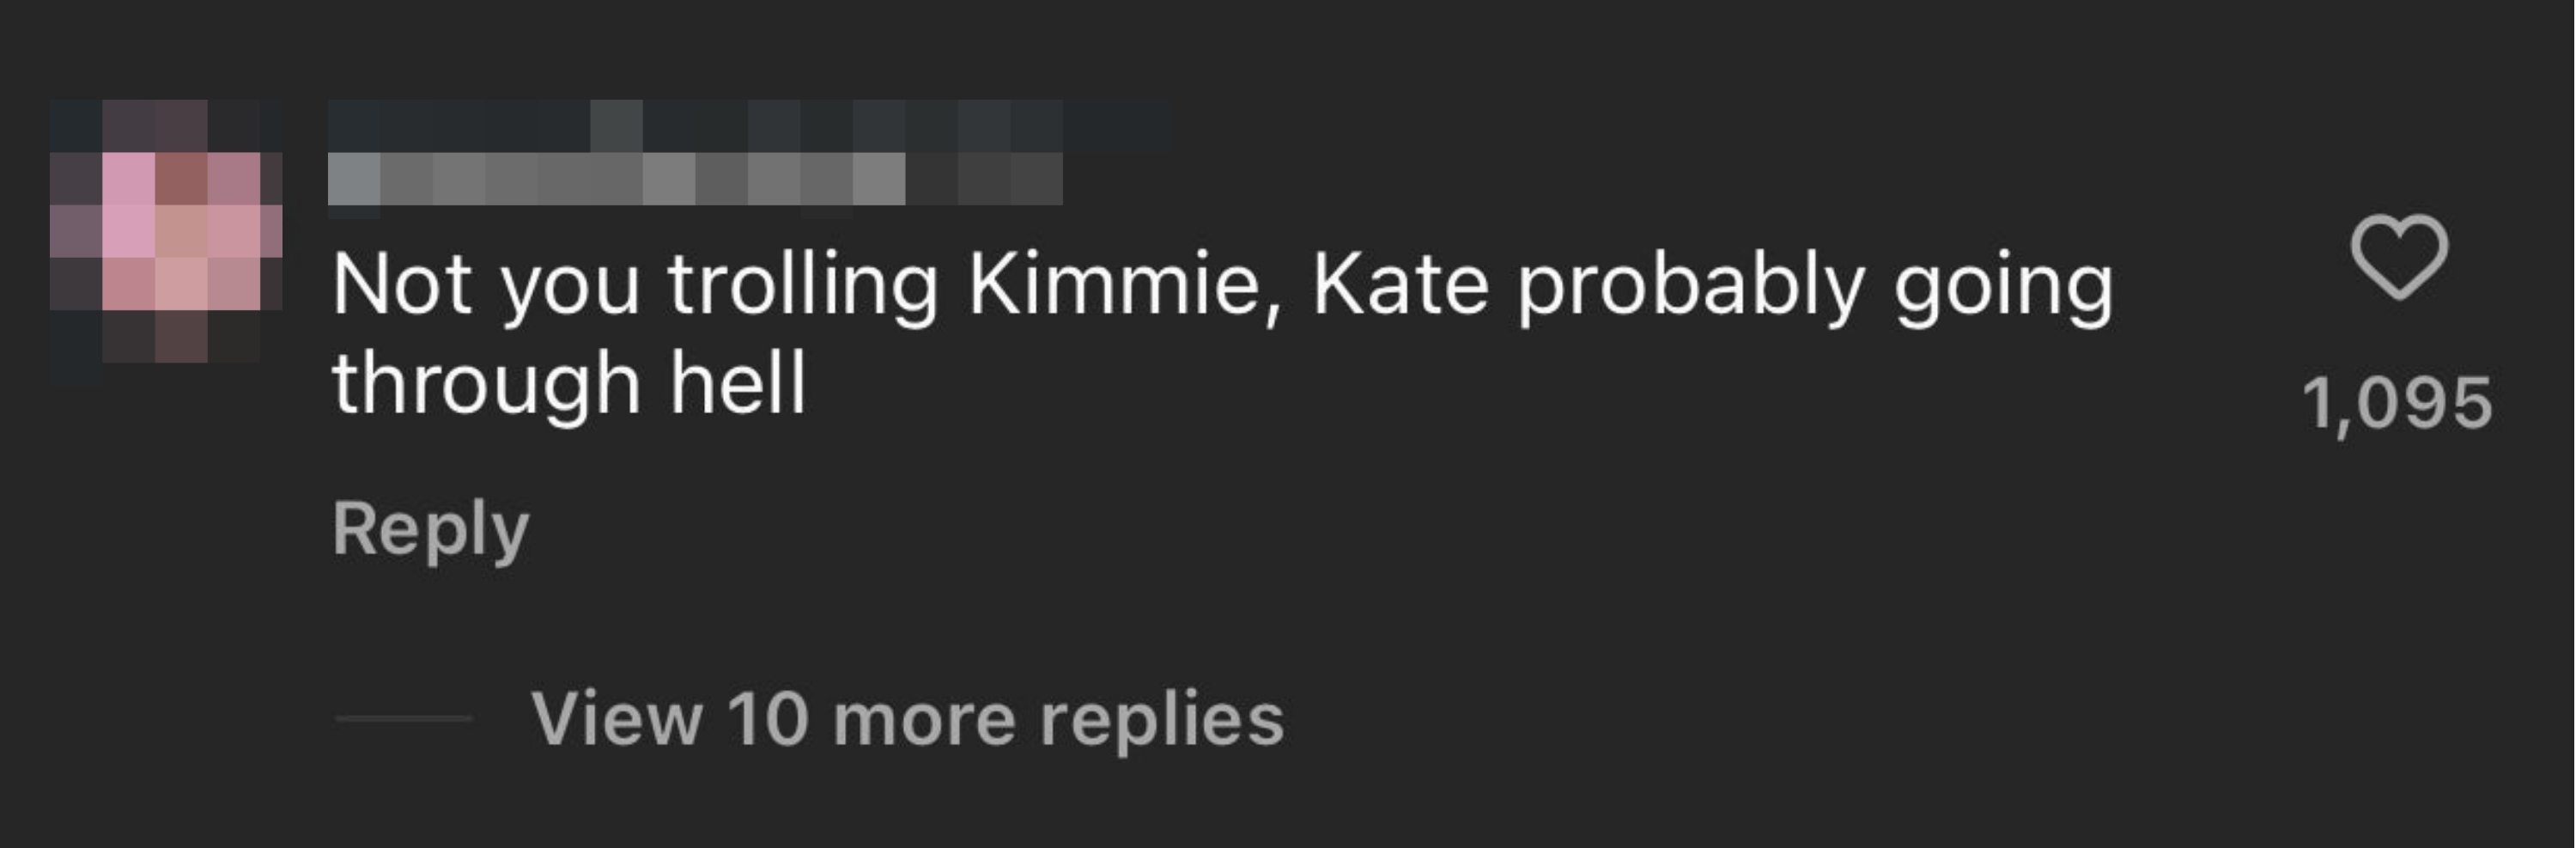 Instagram comment: &quot;Not you trolling Kimmie, Kate probably going through hell&quot; with 1,095 likes